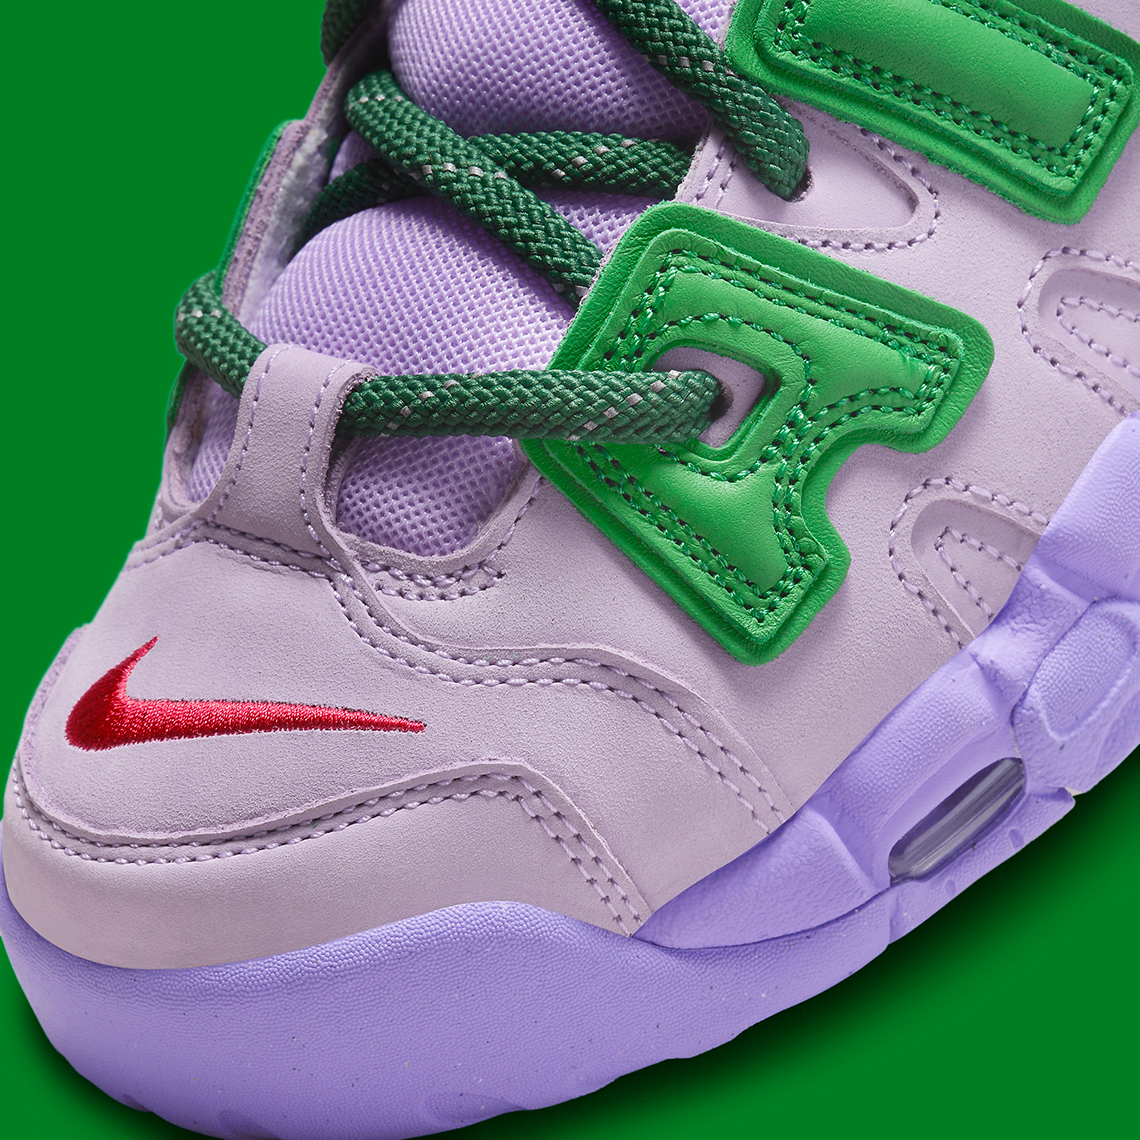 Ambush Nike Air More Uptempo Lilac University Red Team Green Apple Green Fb1299 500 Release Date 6